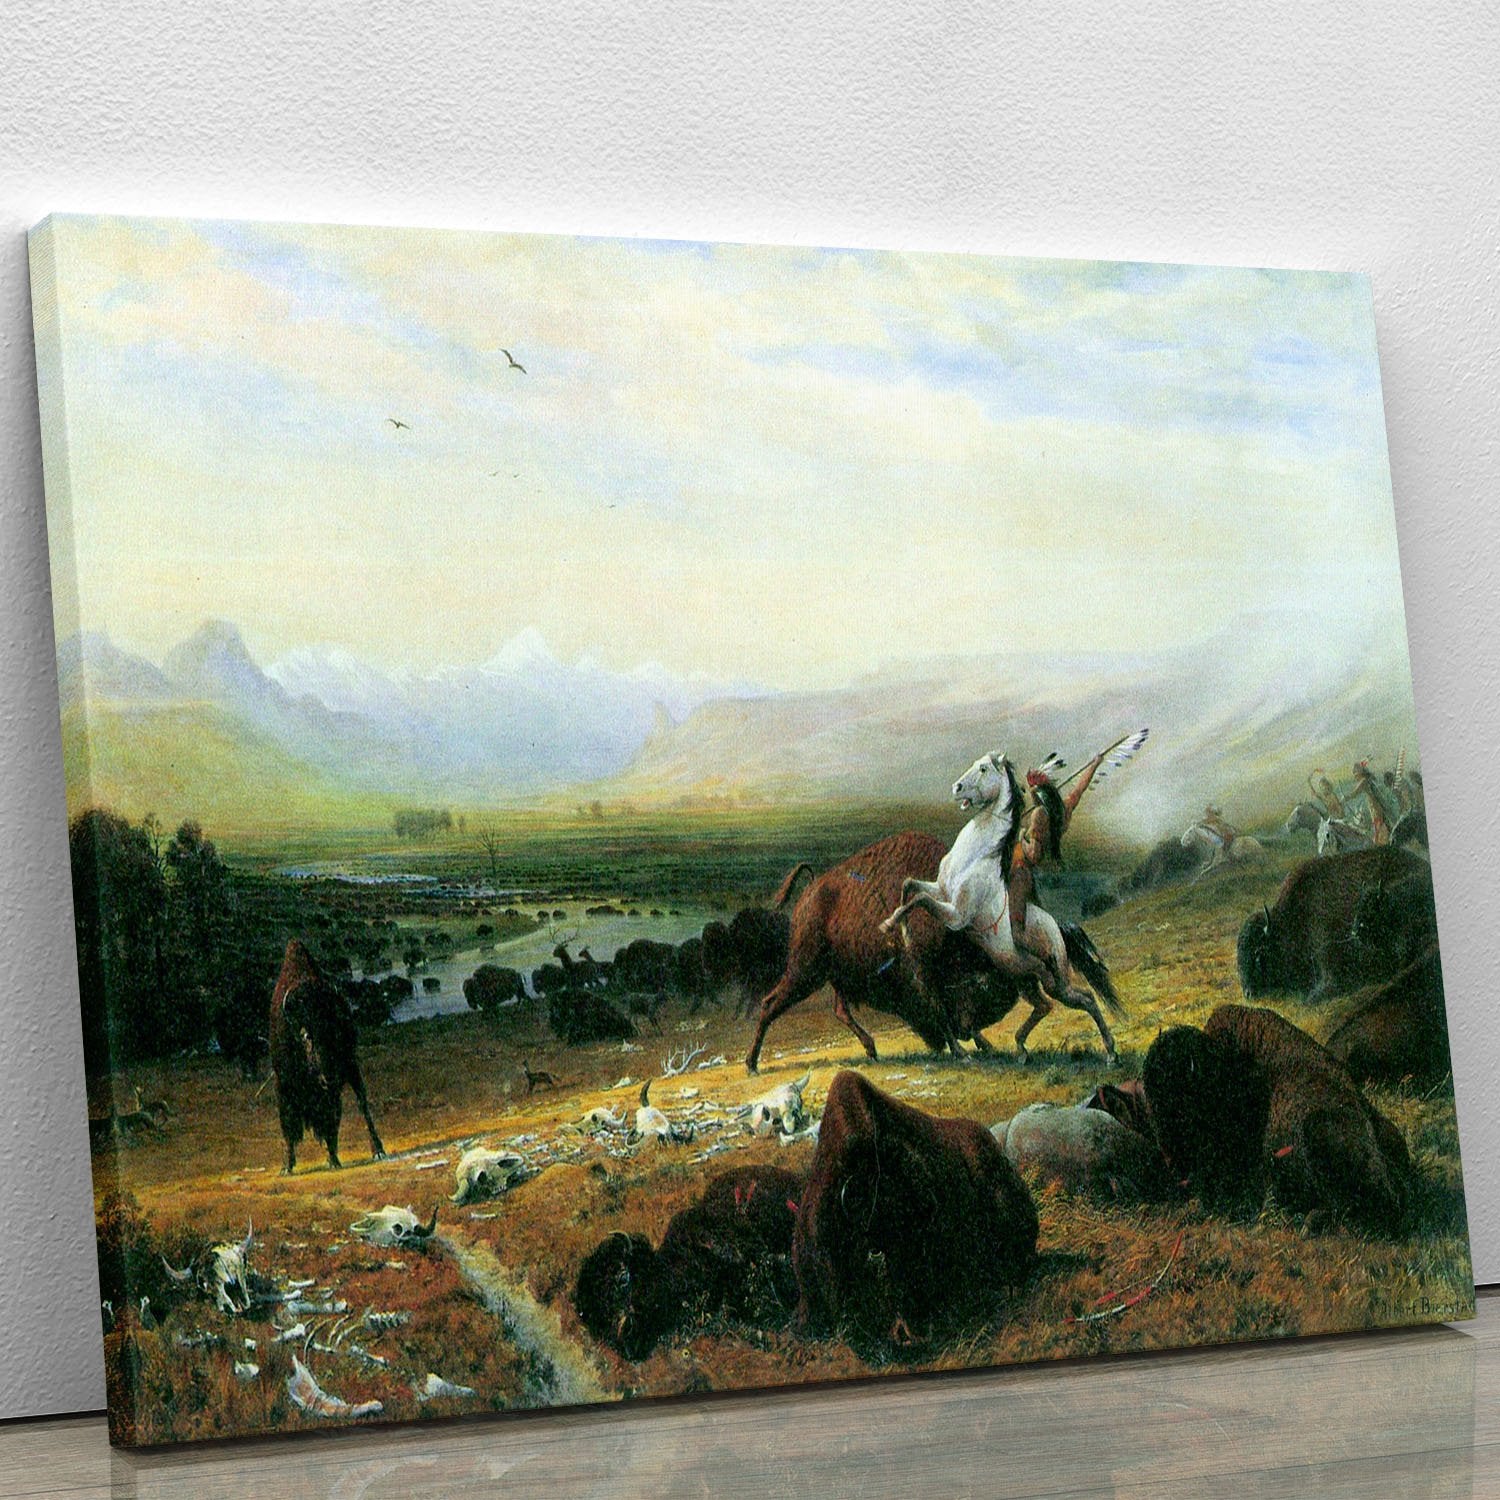 The last Buffalo by Bierstadt Canvas Print or Poster